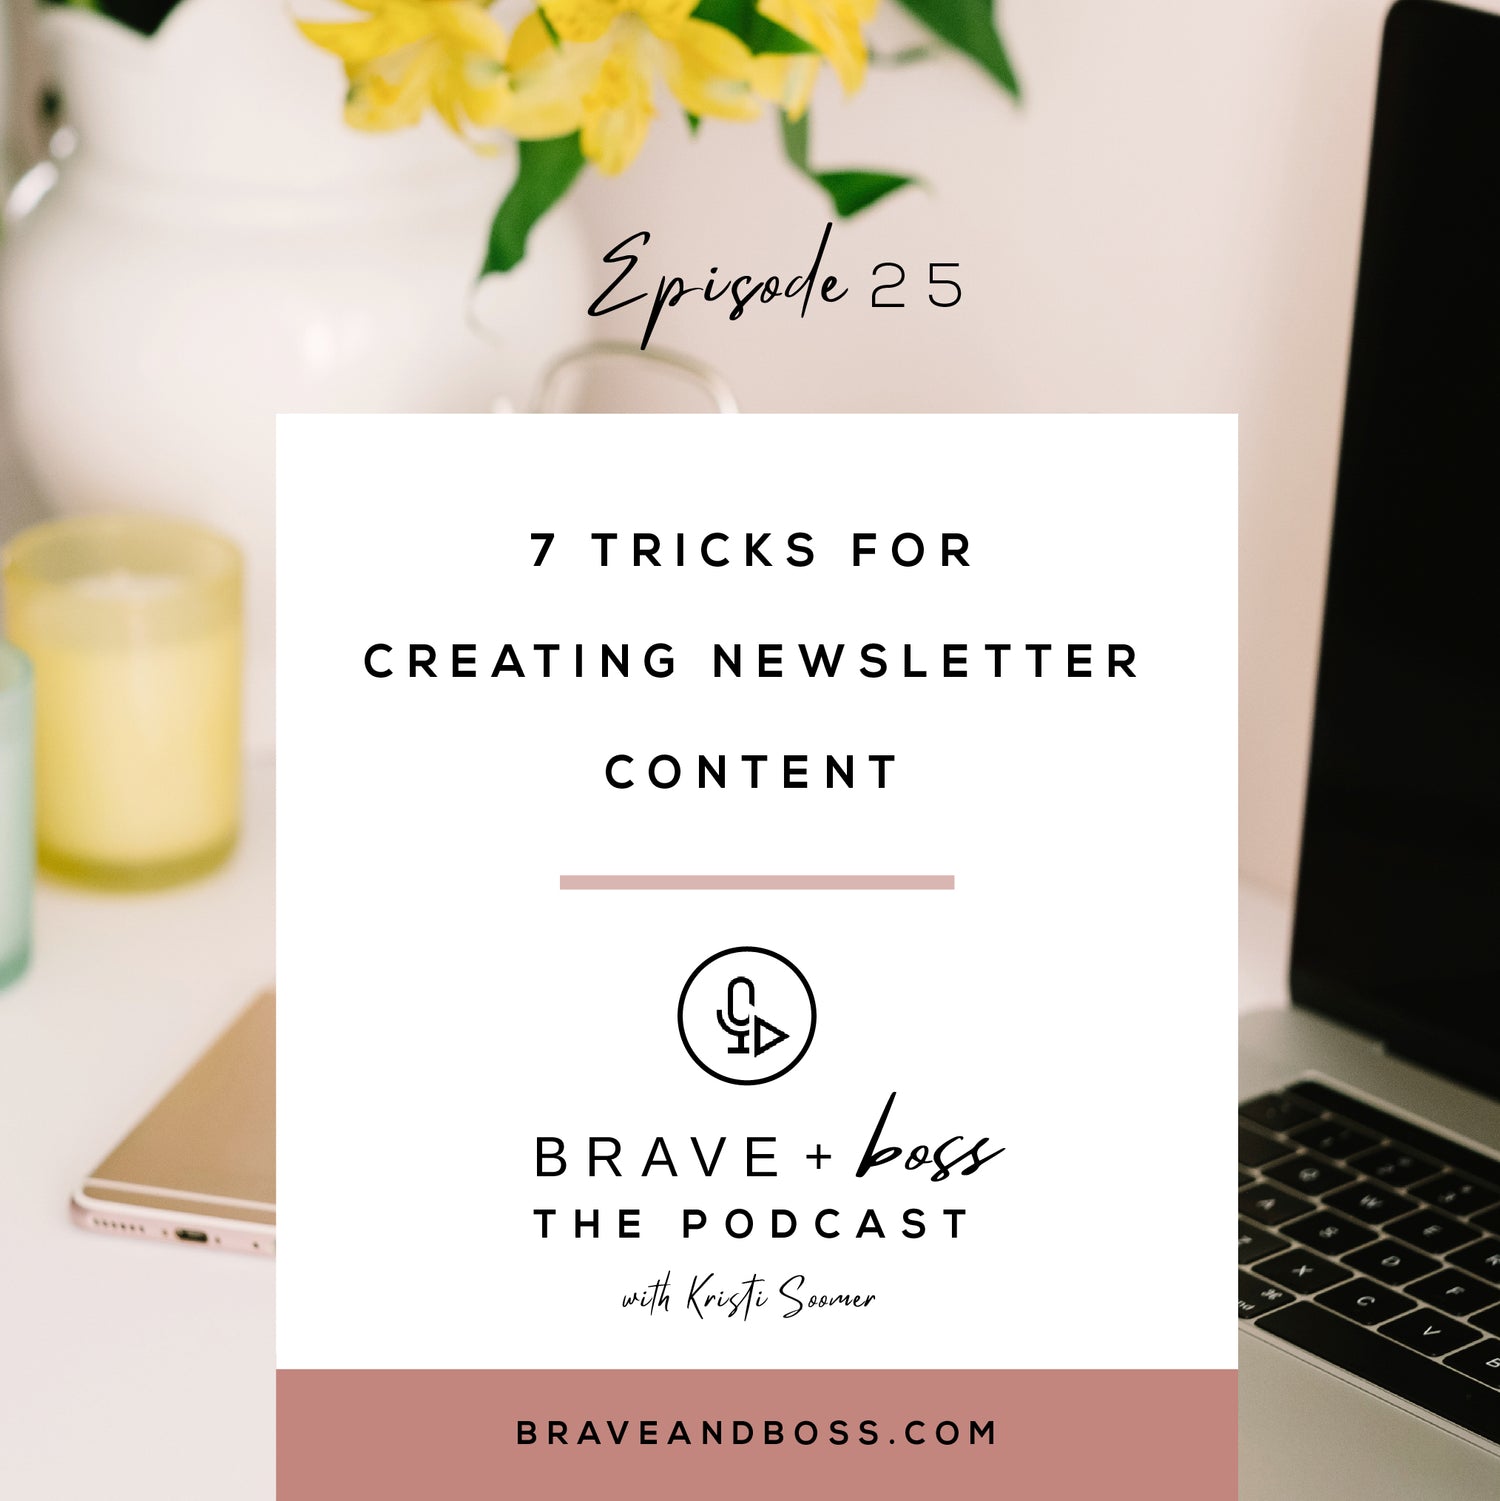 7 Tricks for Creating Newsletter Content